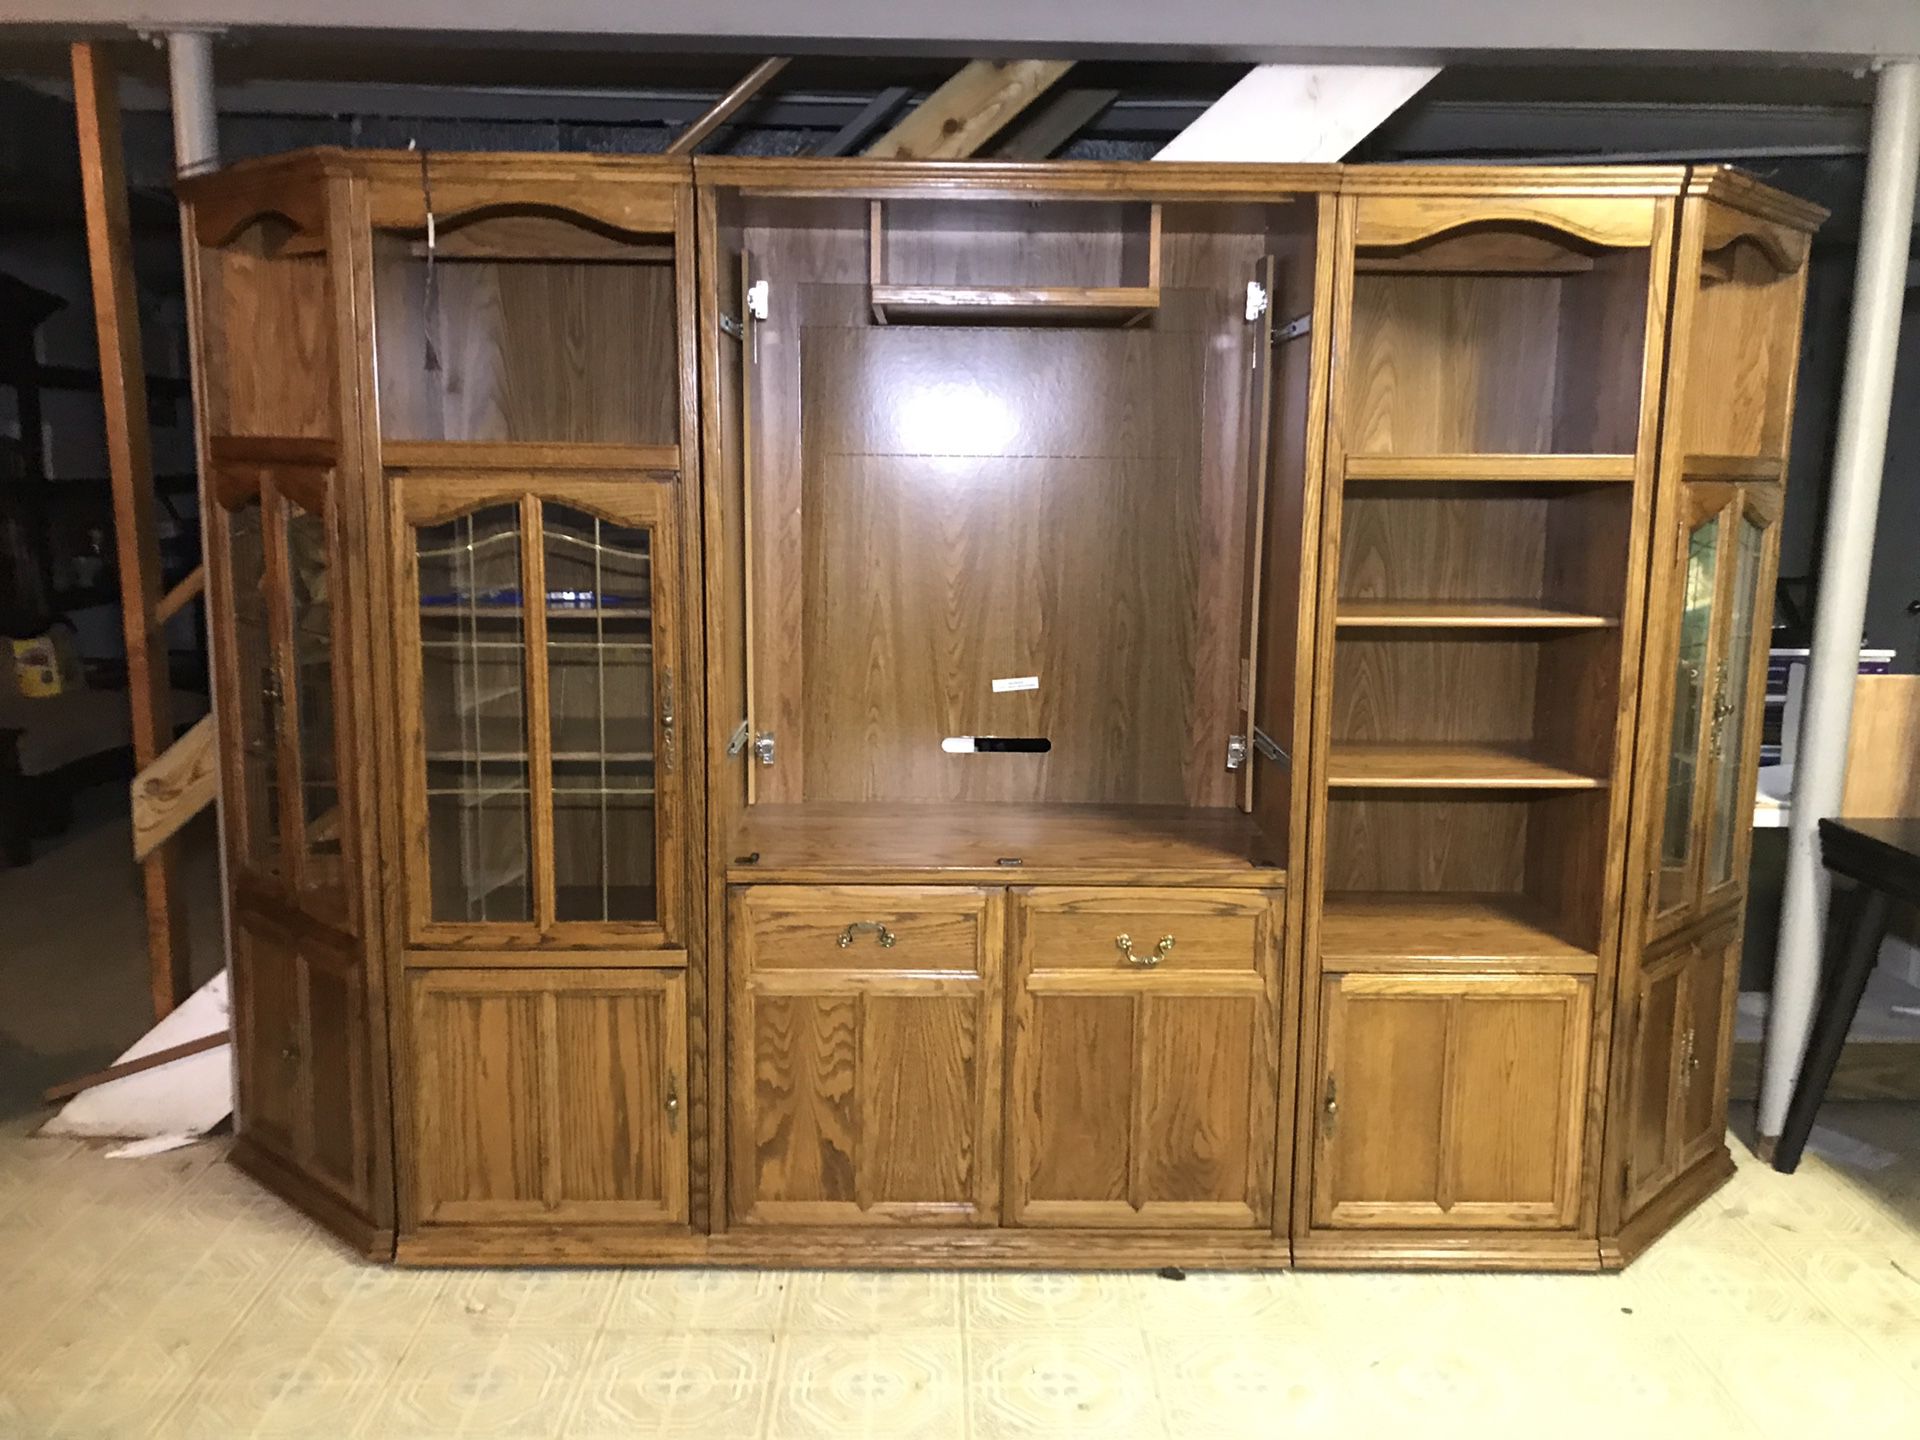 5 Piece Lighted Entertainment Center- Tons of Storage, Corner Cabinets, Shelves 10’3”x 22”x76”